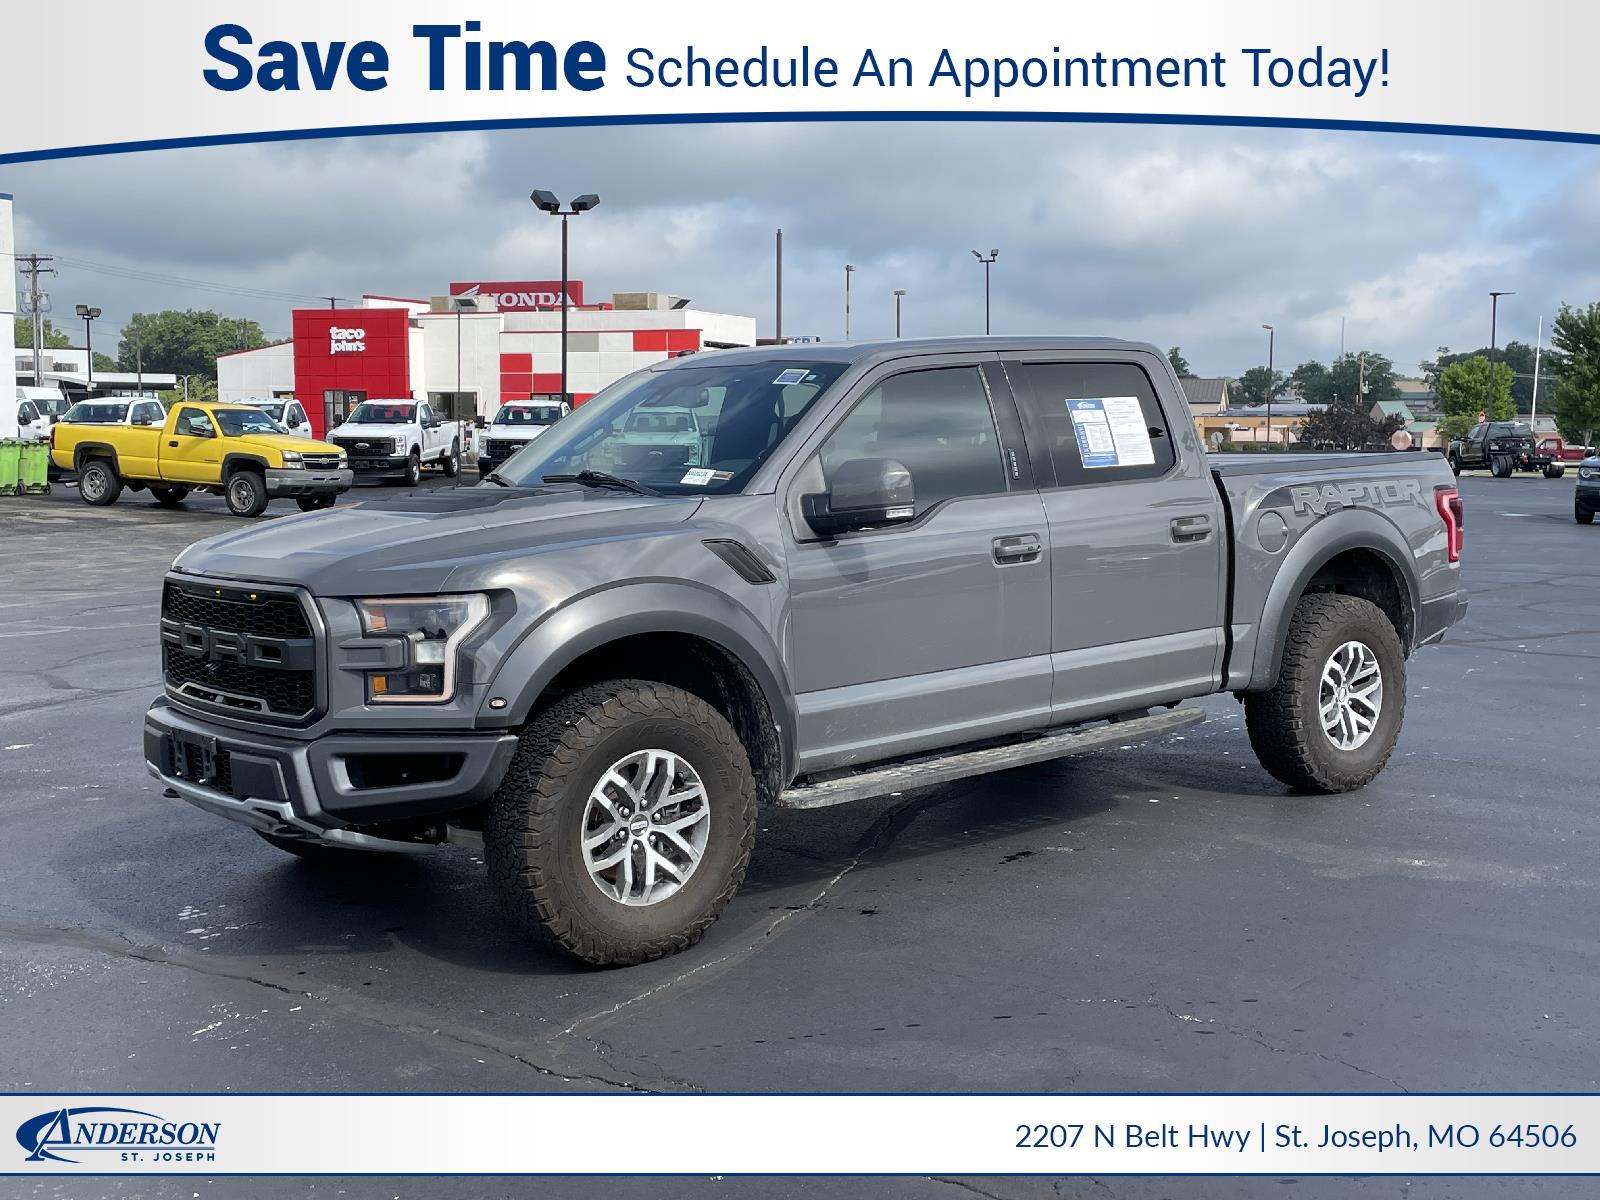 Used 2018 Ford F-150 Raptor Crew Cab Truck for sale in St Joseph MO